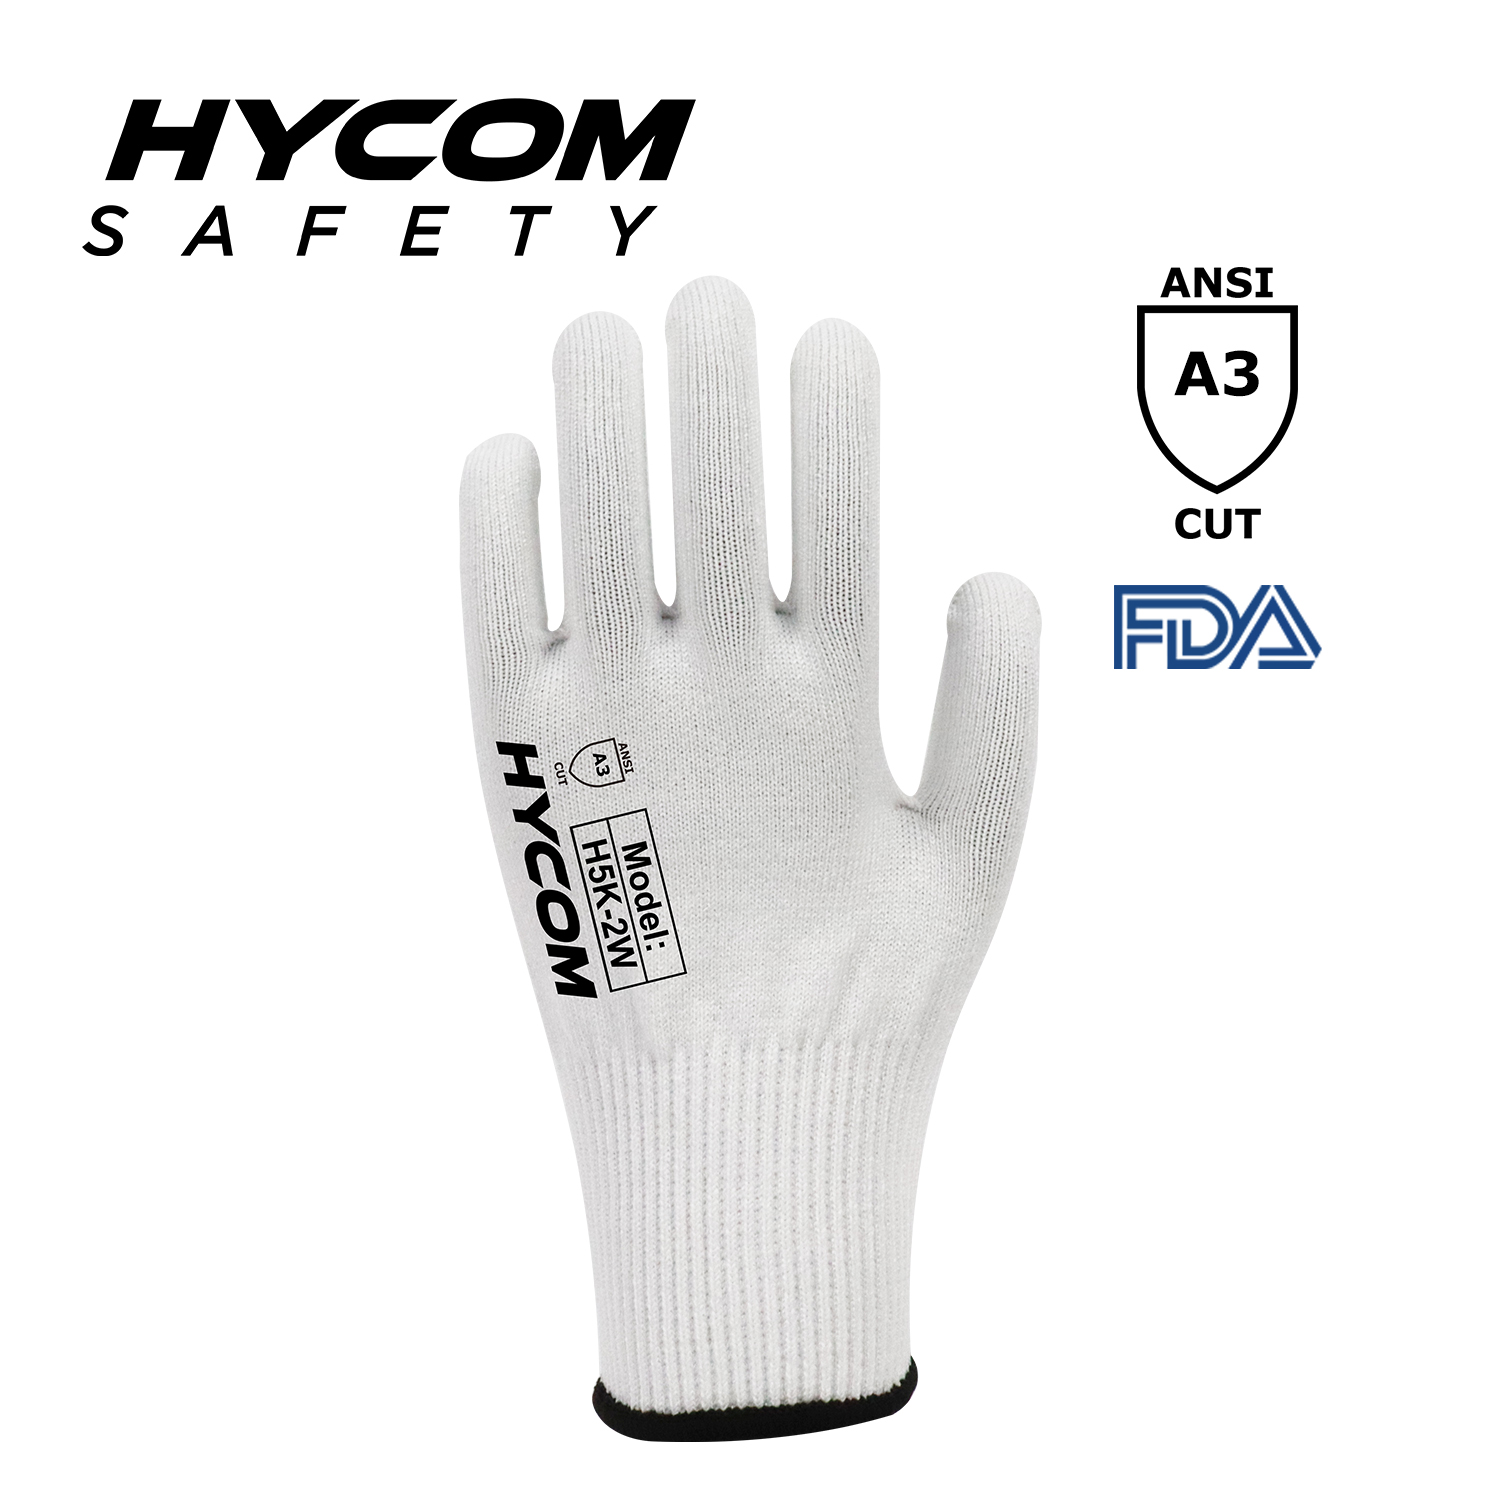 HYCOM 13G Level 5 Cut Resistant Glove FDA Food Contact Directly PPE gloves